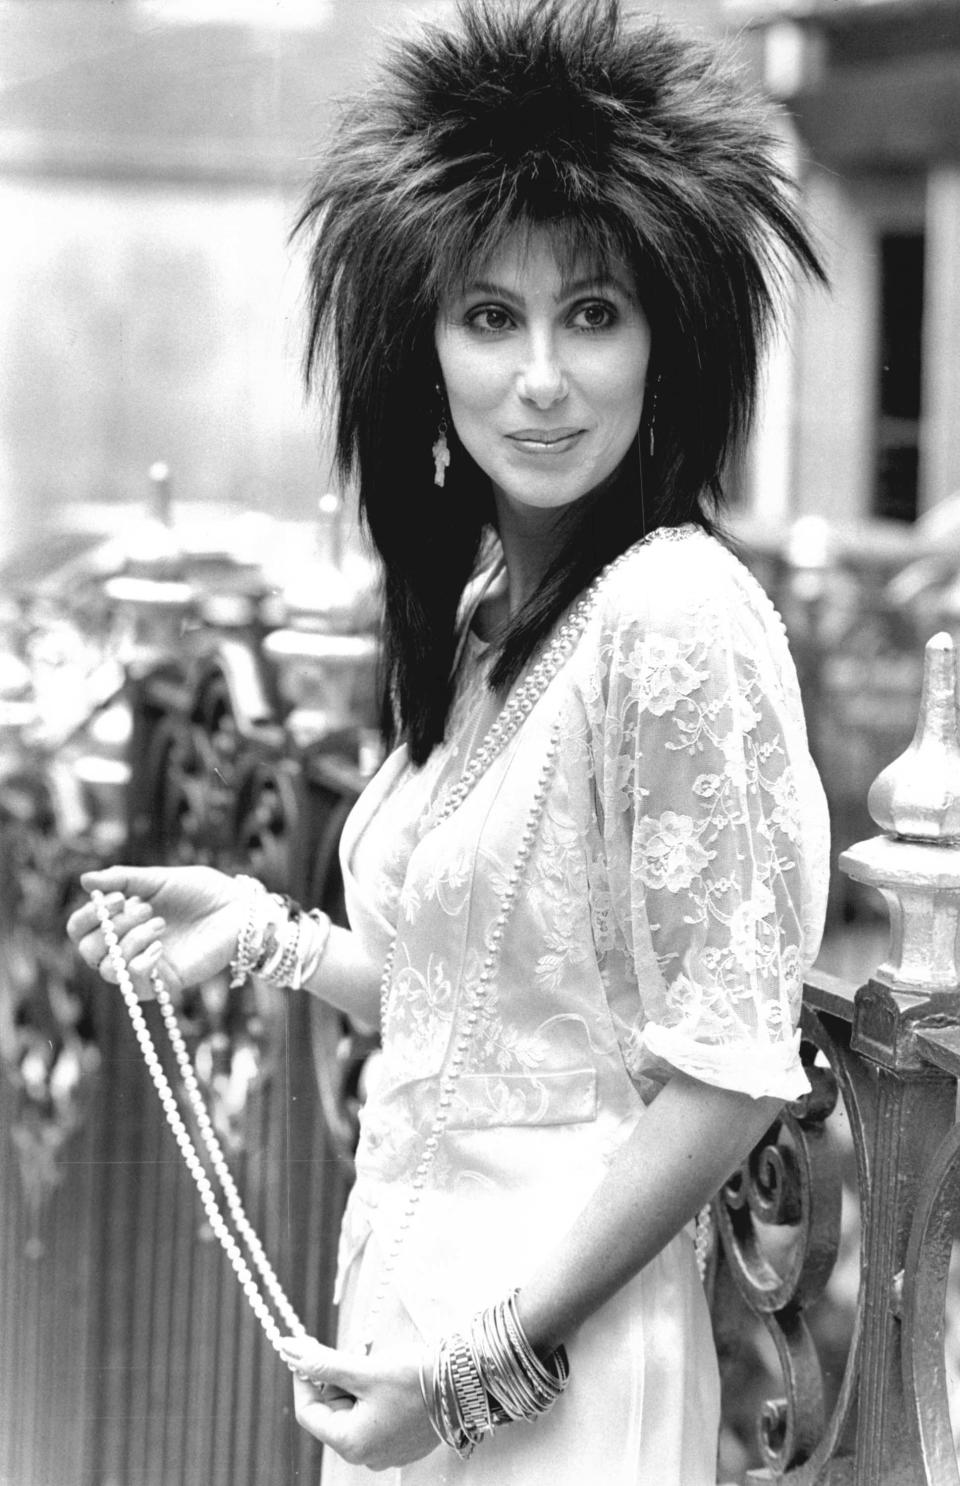 Happy birthday, Cher! Here's a look back at her most risk-taking beauty moments.